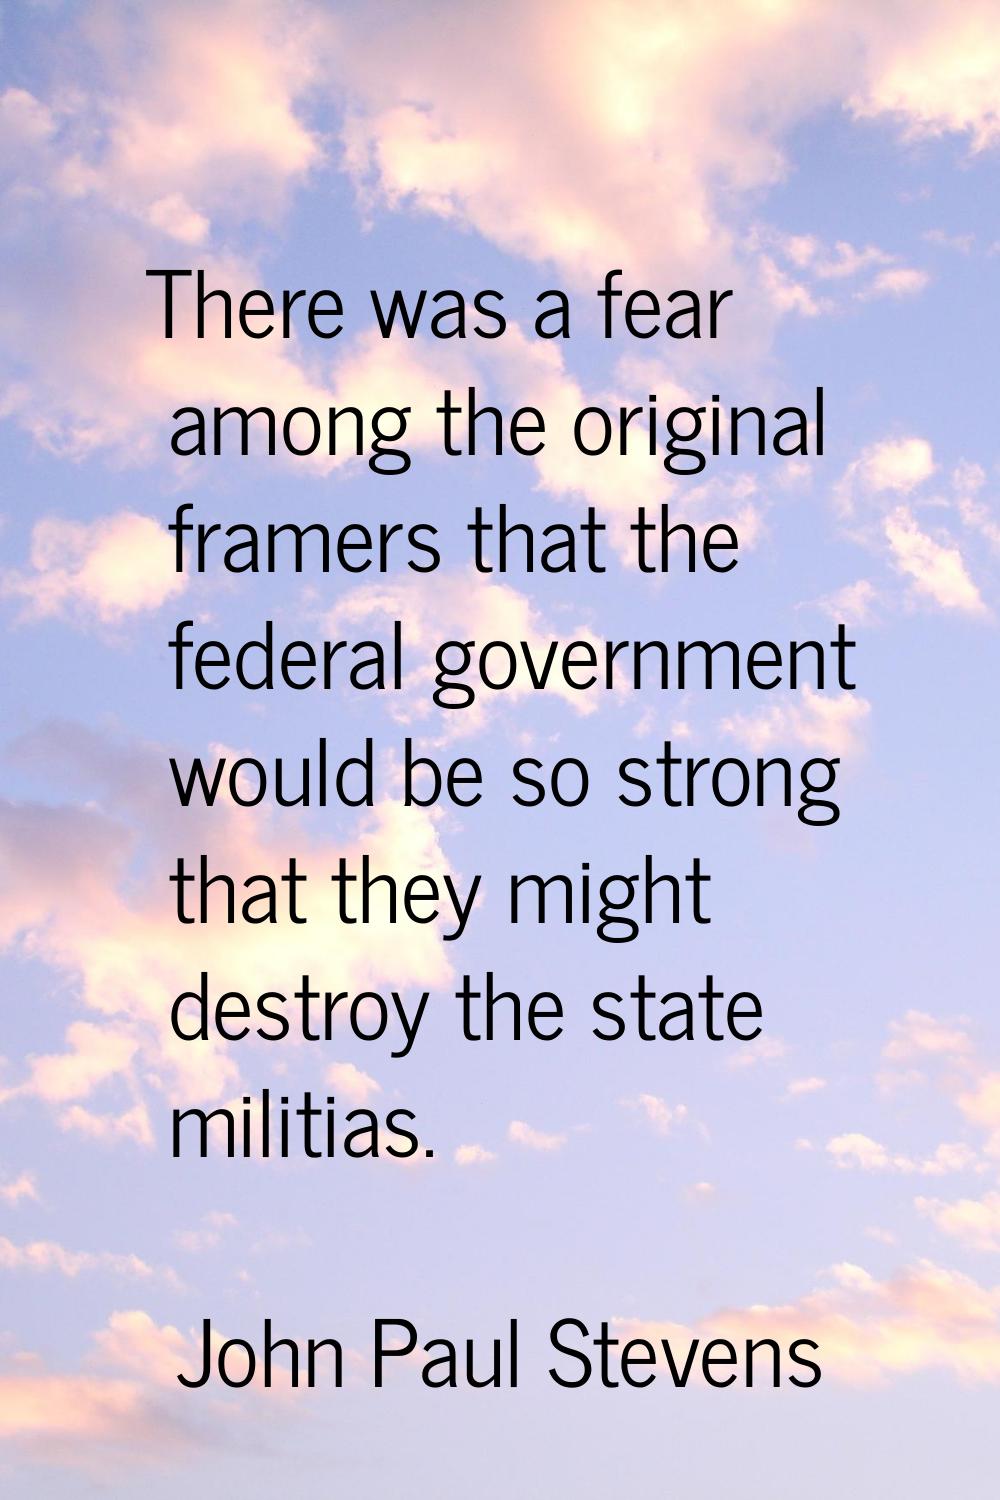 There was a fear among the original framers that the federal government would be so strong that the